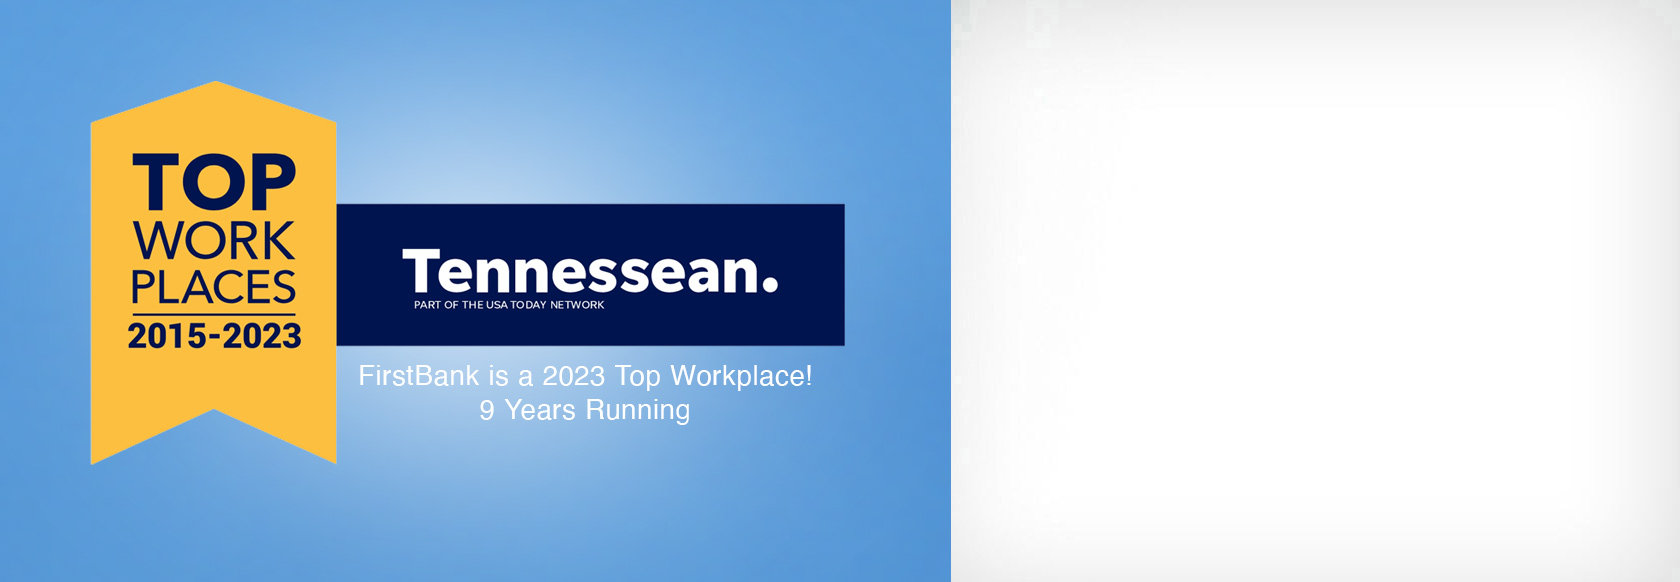 Top Work Places Tennessean 2015-2023